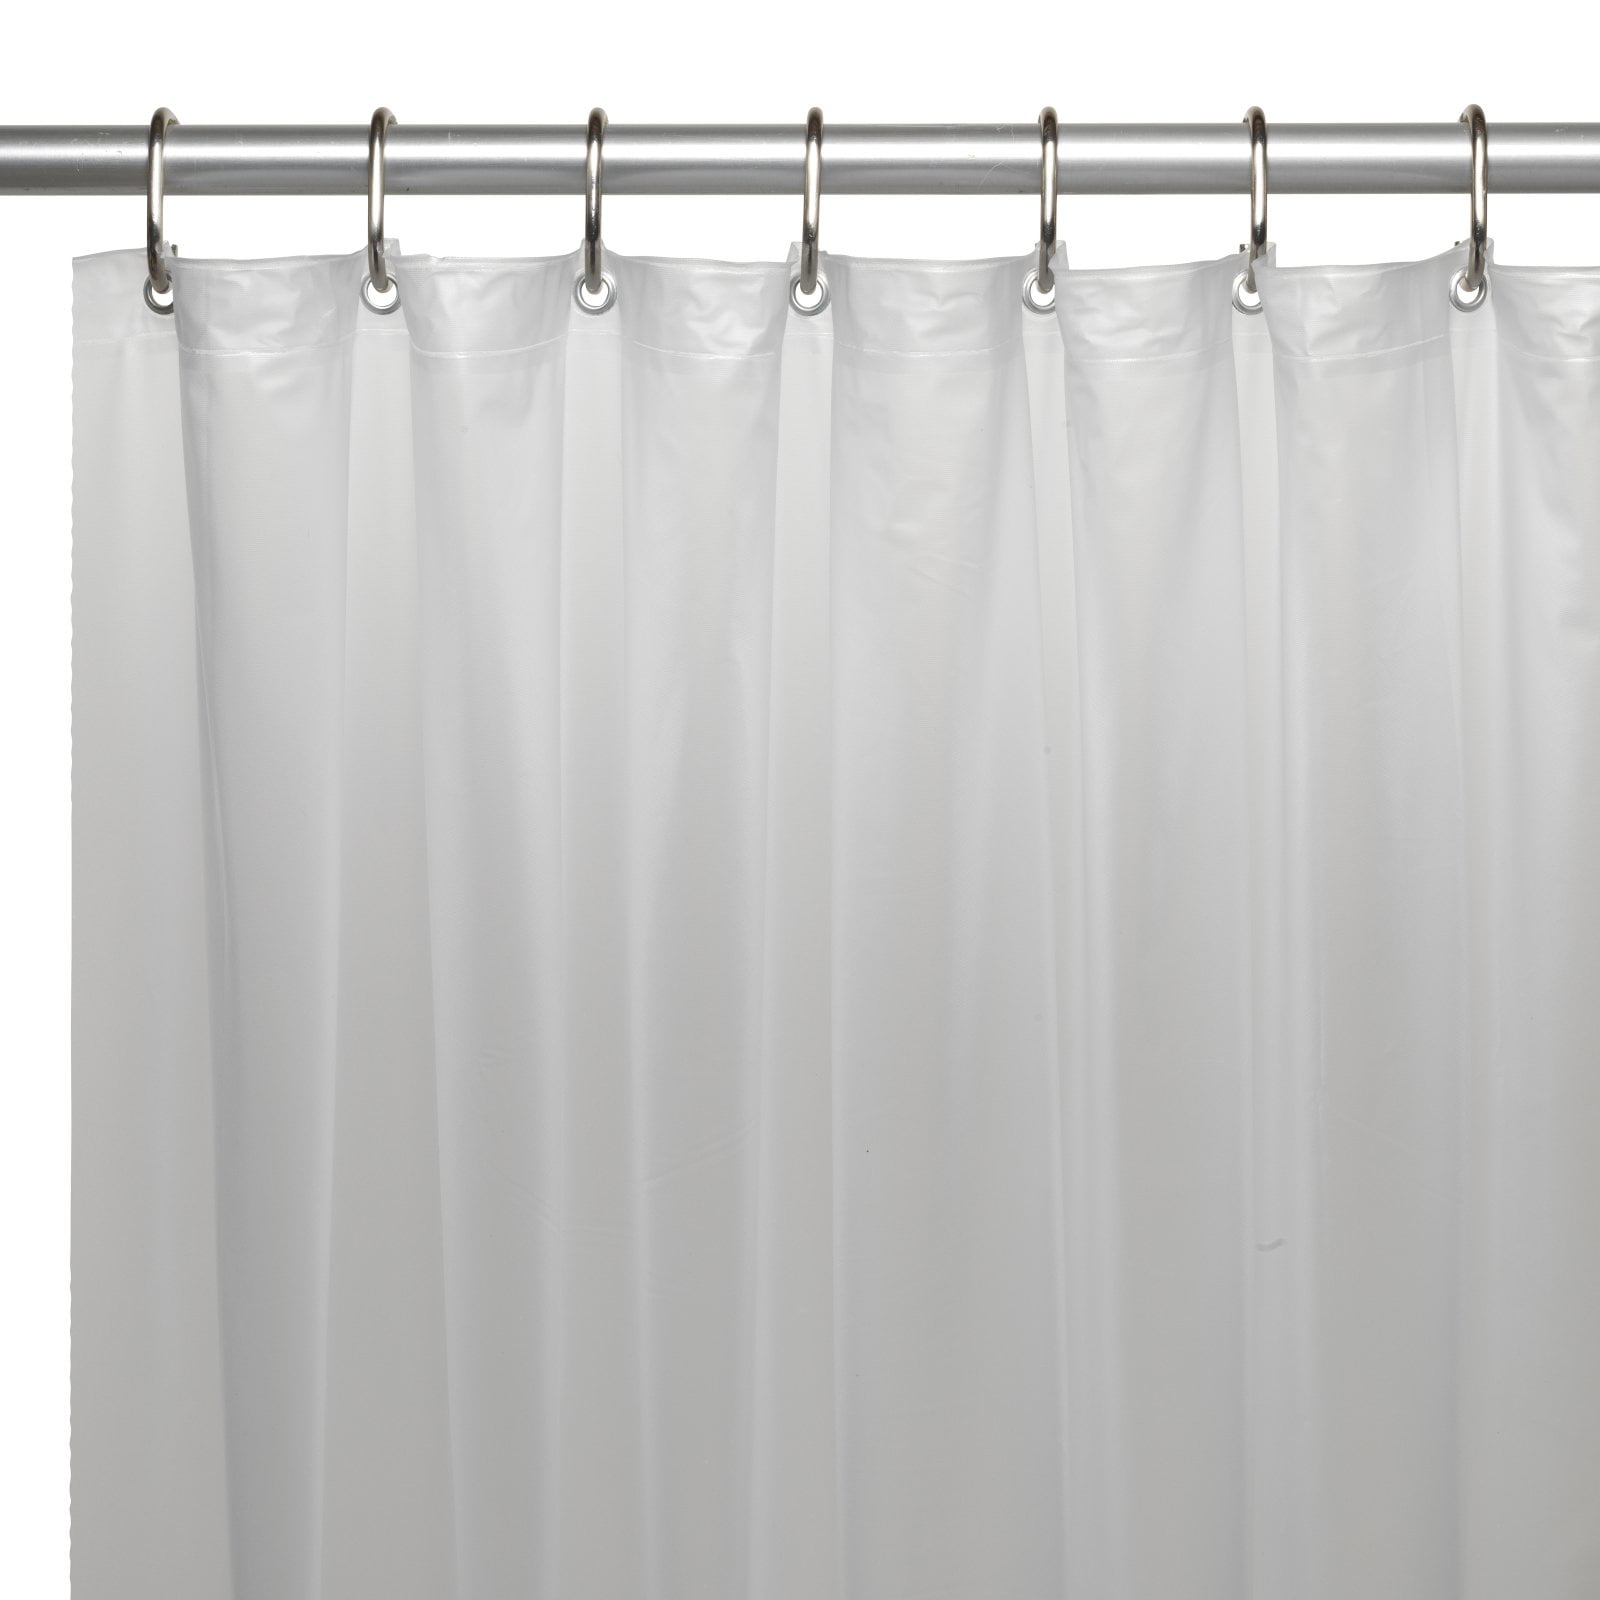 VCNY Peva Plastic Shower Curtain Liners With Magnets Assorted Colors 